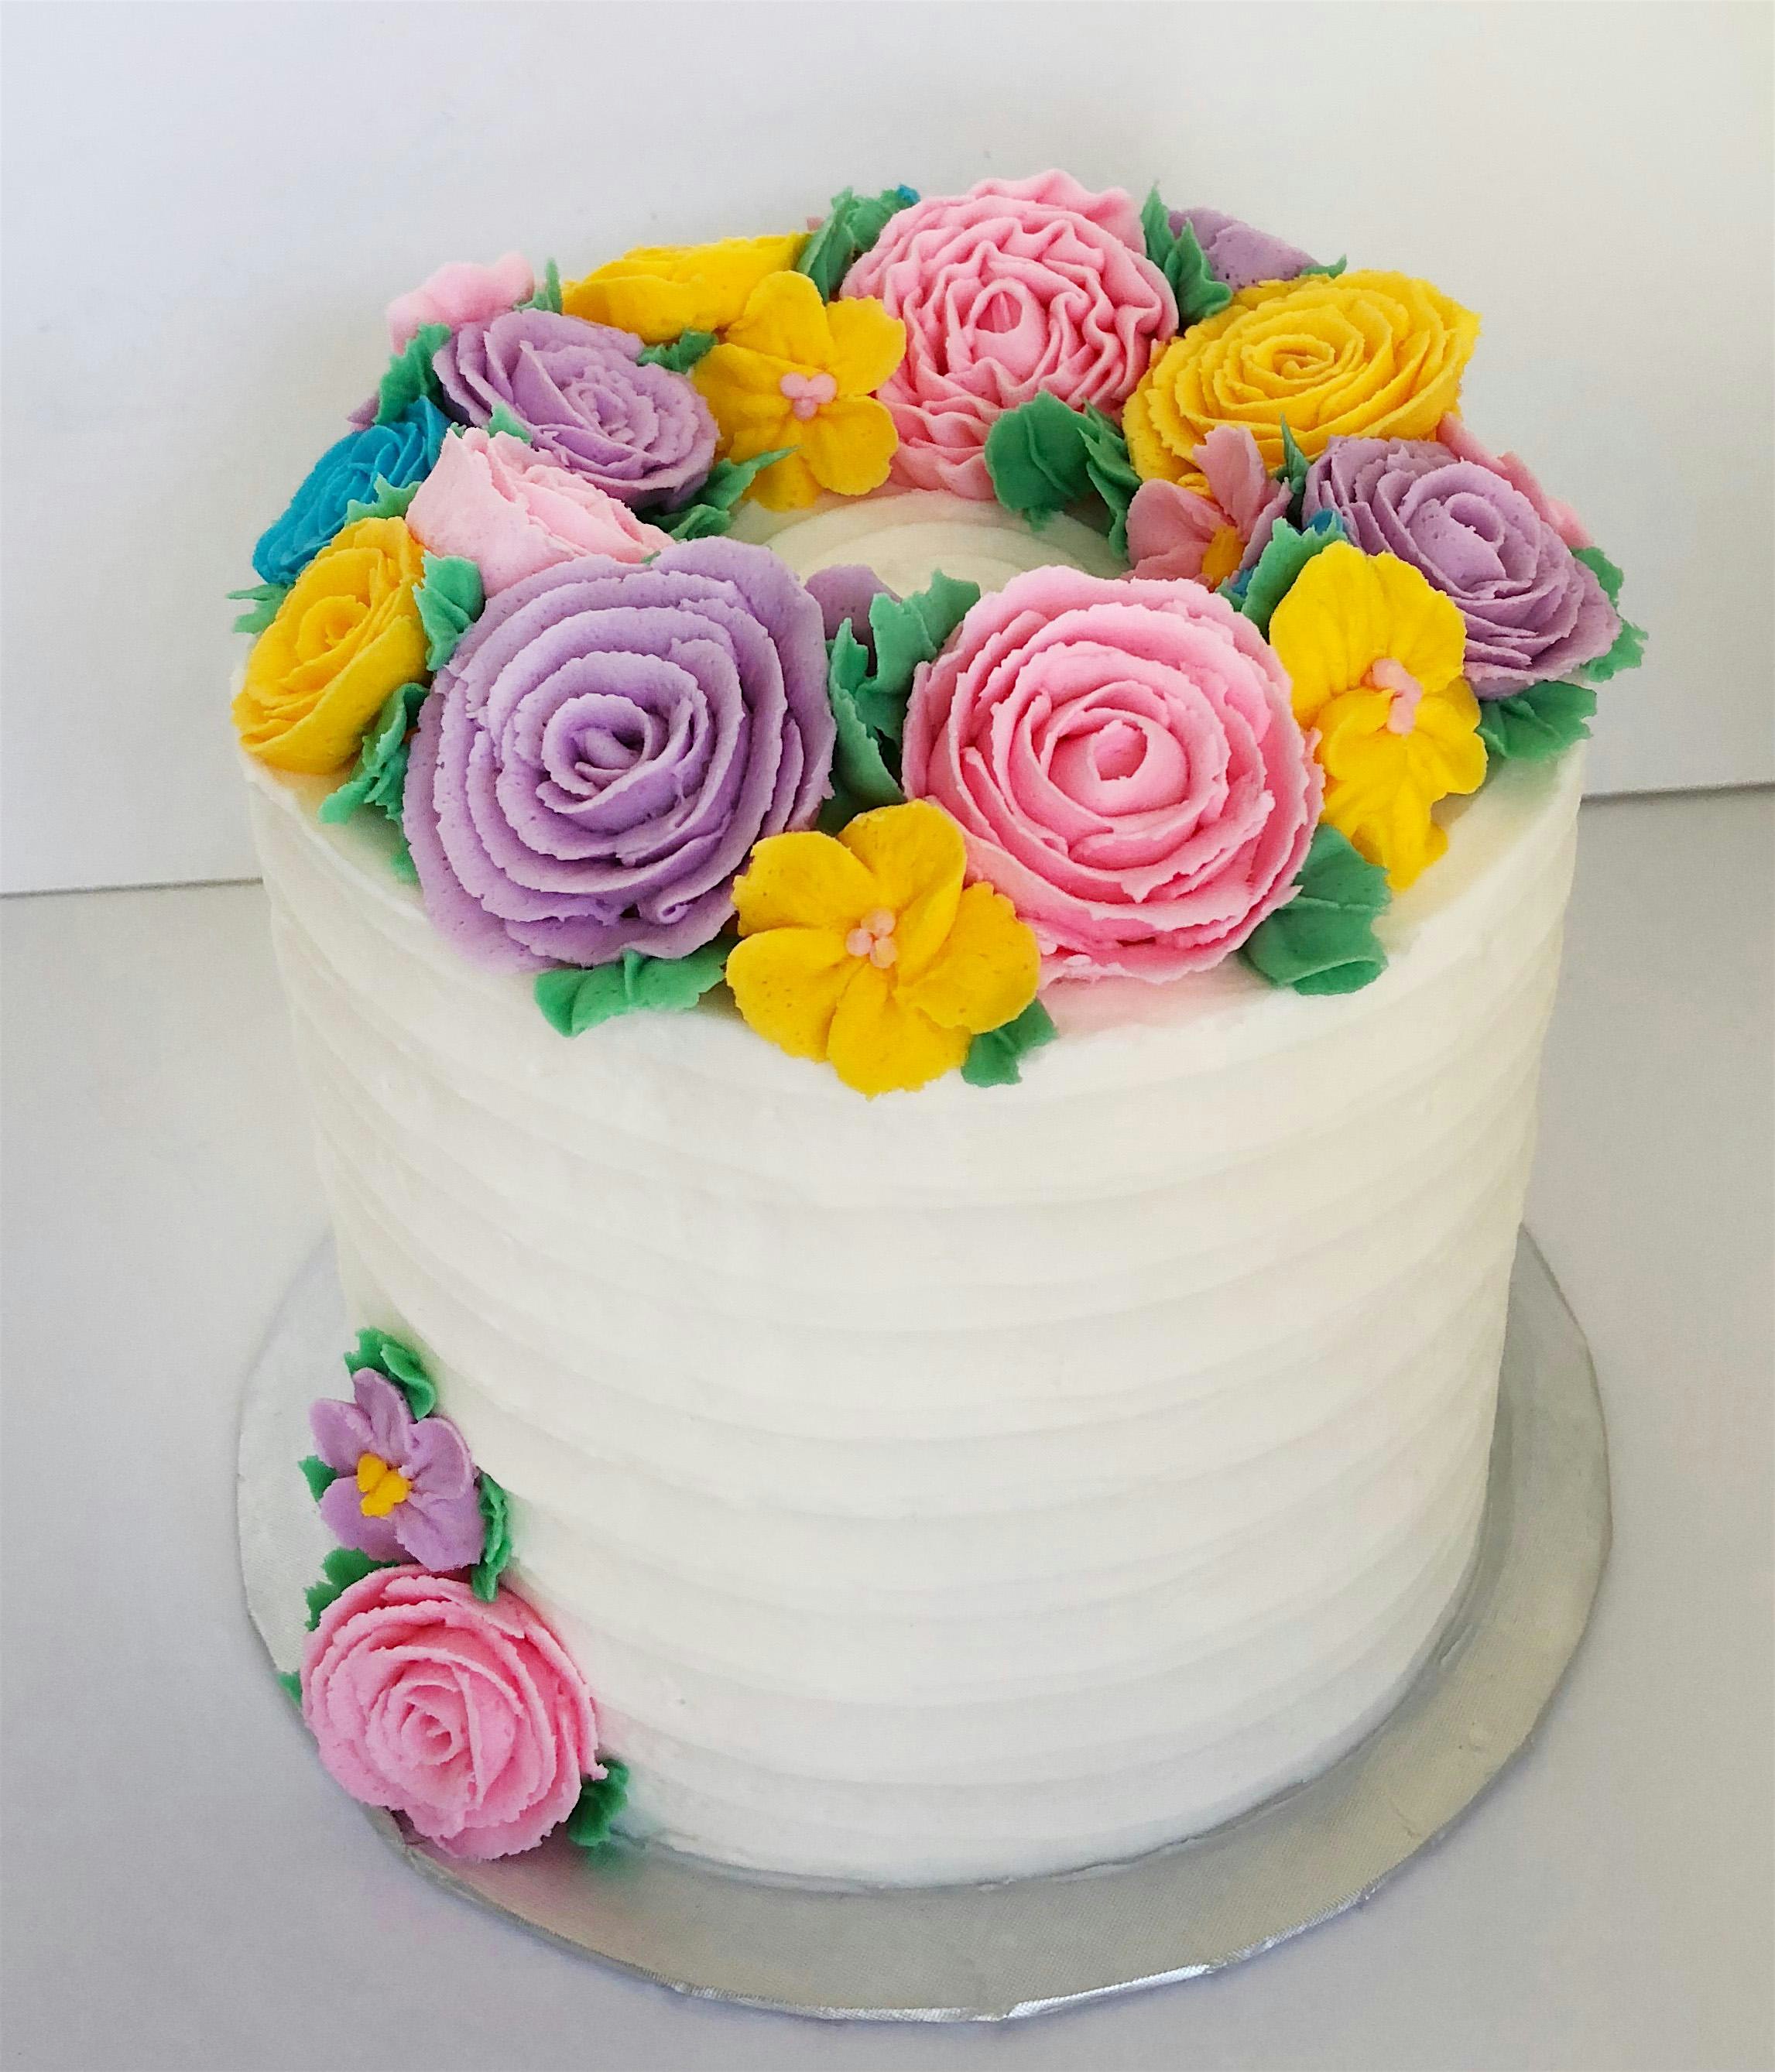 Cake Decorating: Summer Wreath Cake at Frans Cake and Candy Supplies